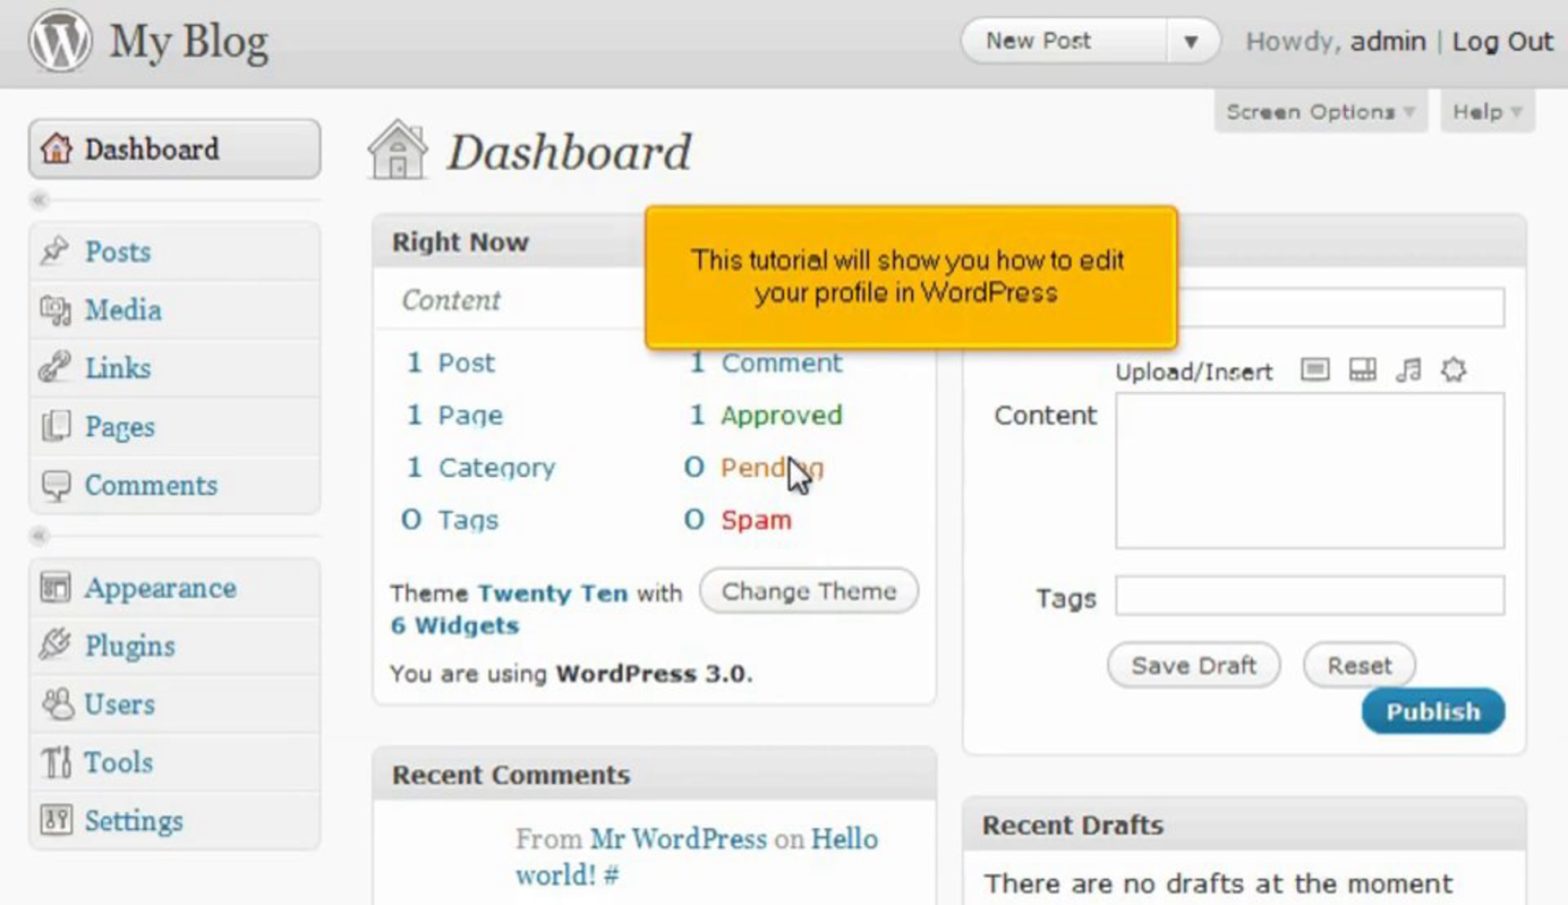 How to edit your profile in WordPress